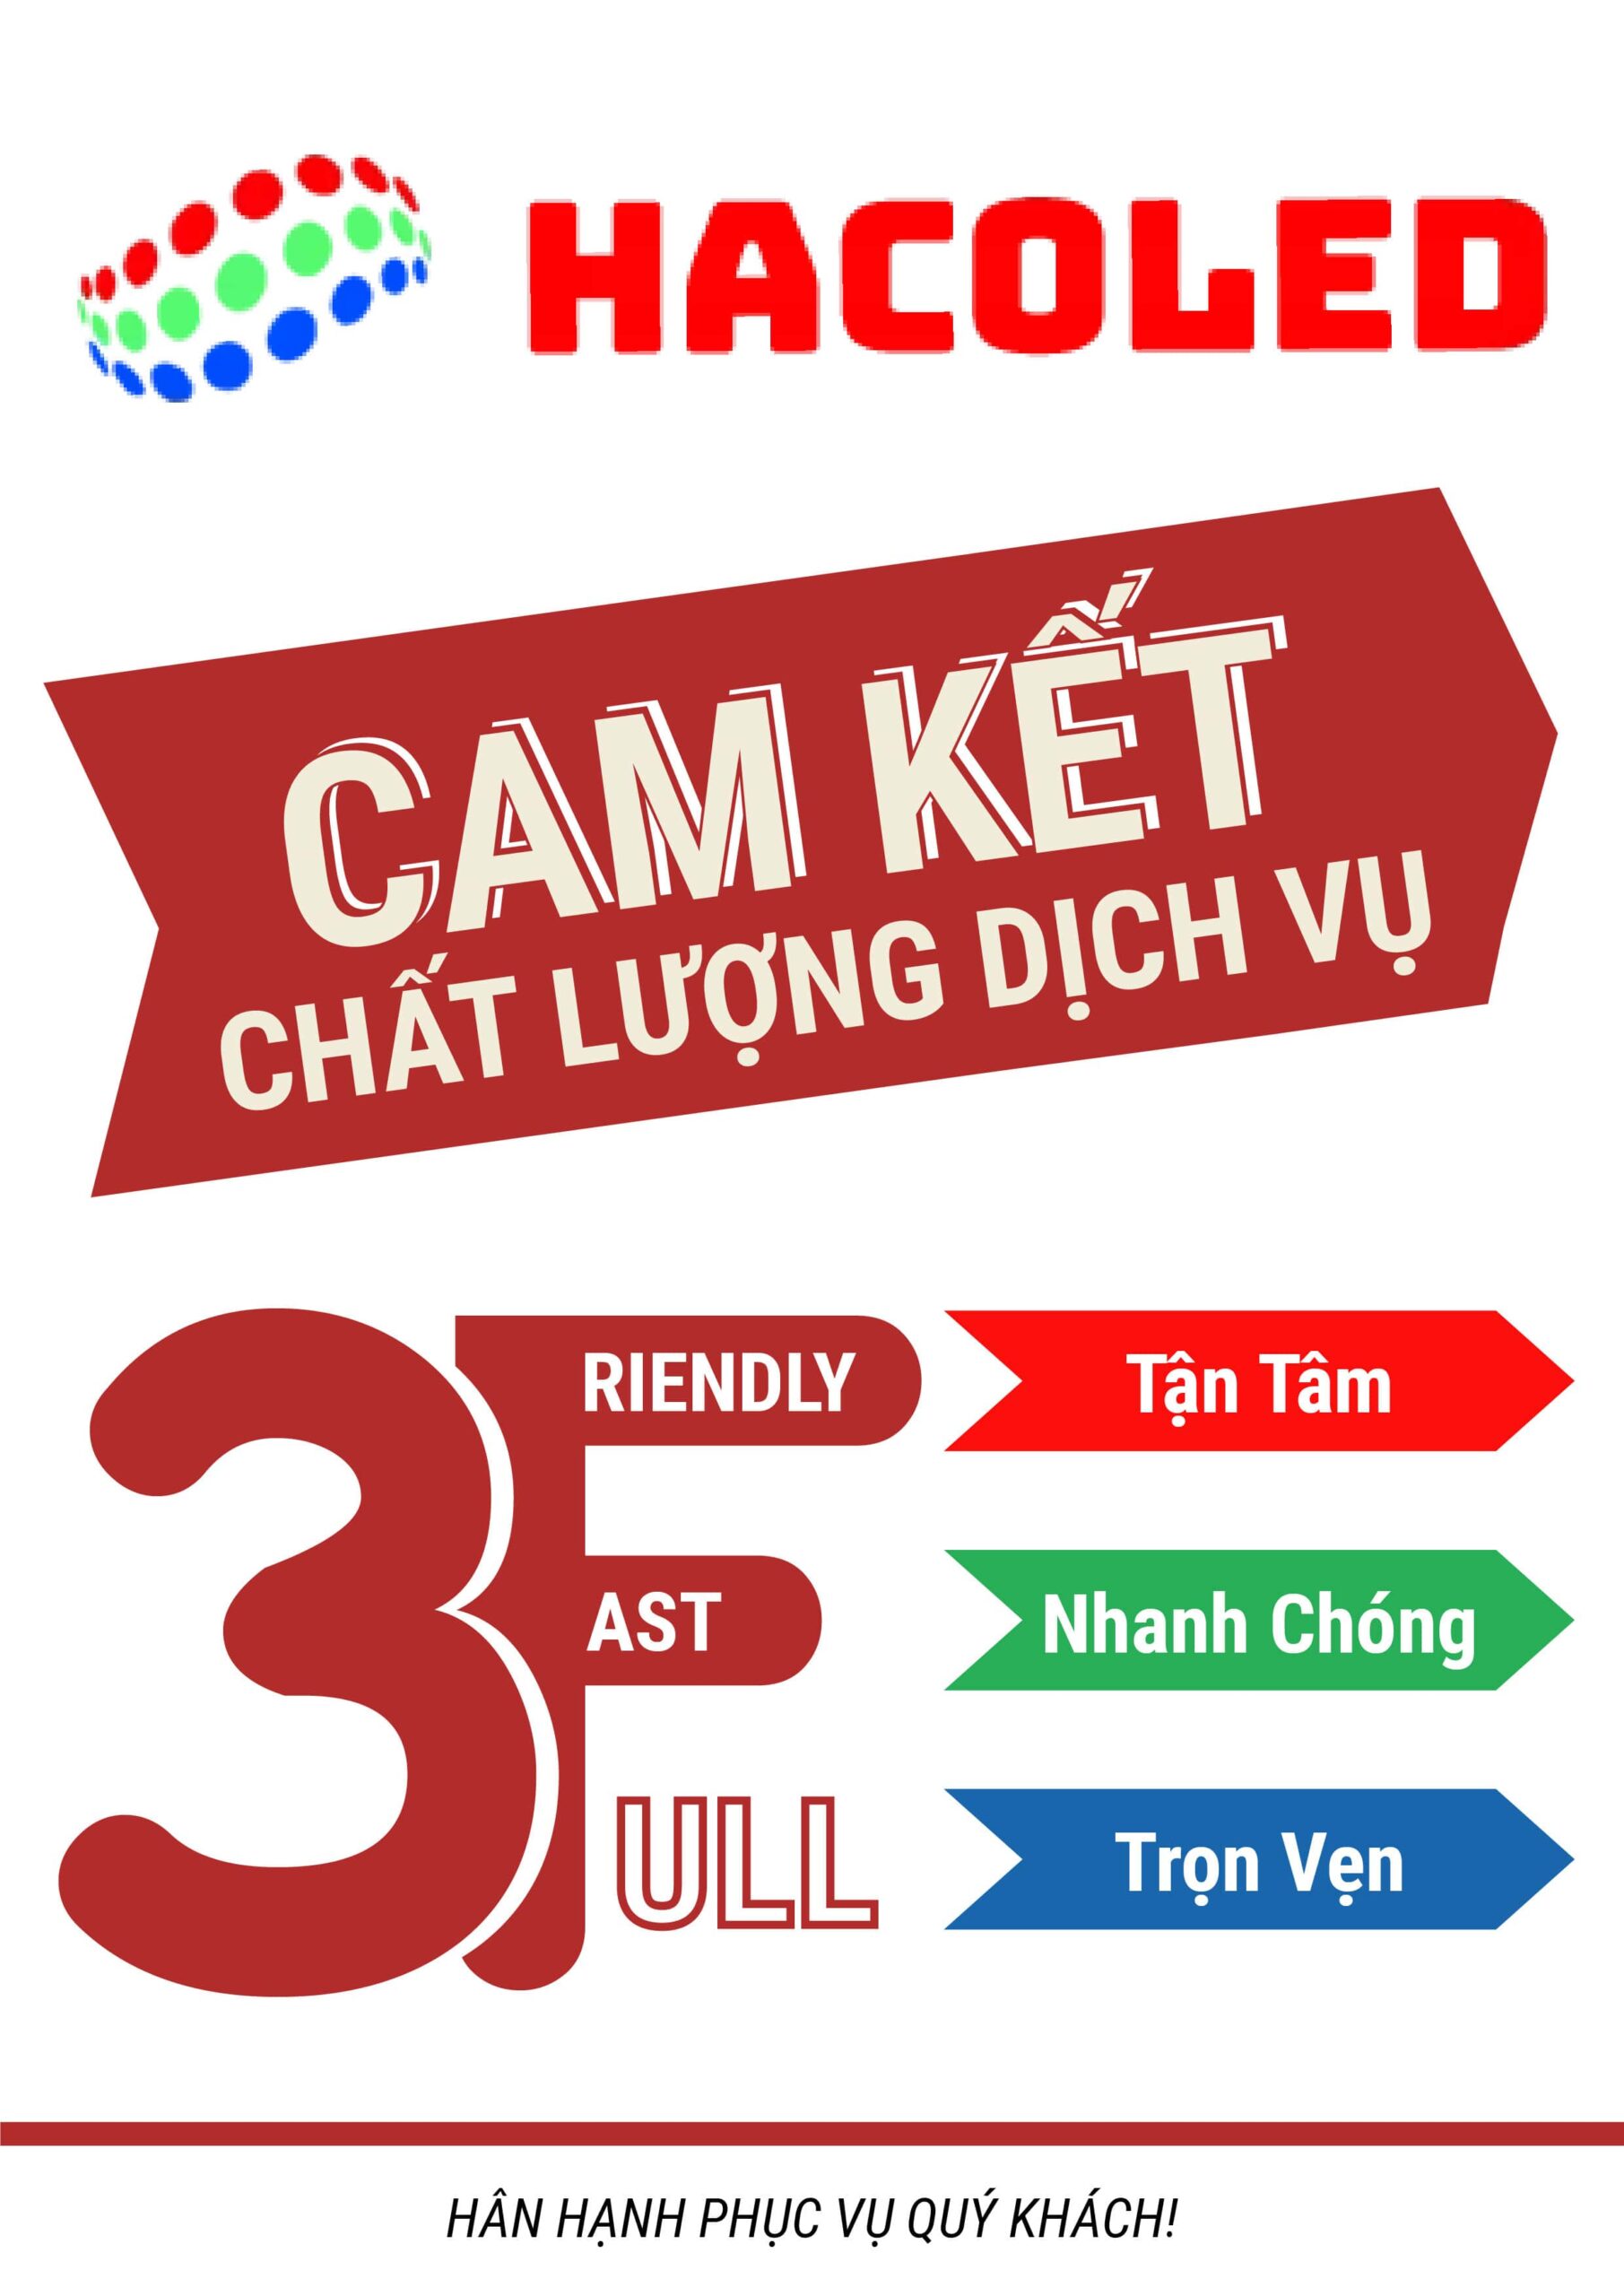 cam-ket-chat-luong-dich-vu-hacoled-3